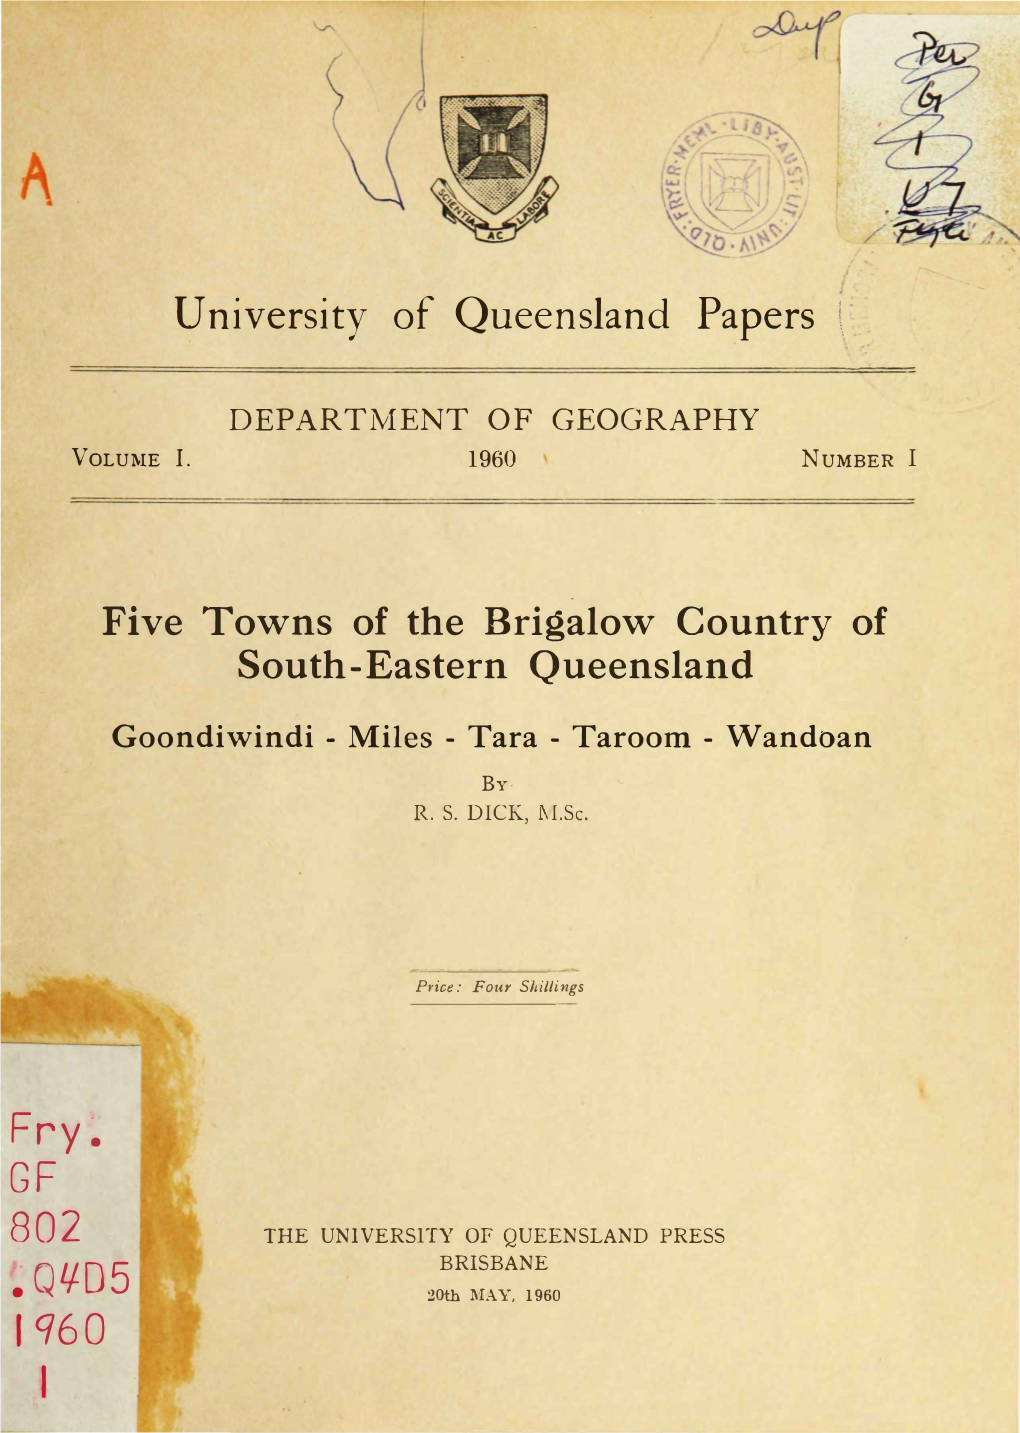 University of Queensland Papers \. Five Towns of the Brigalow